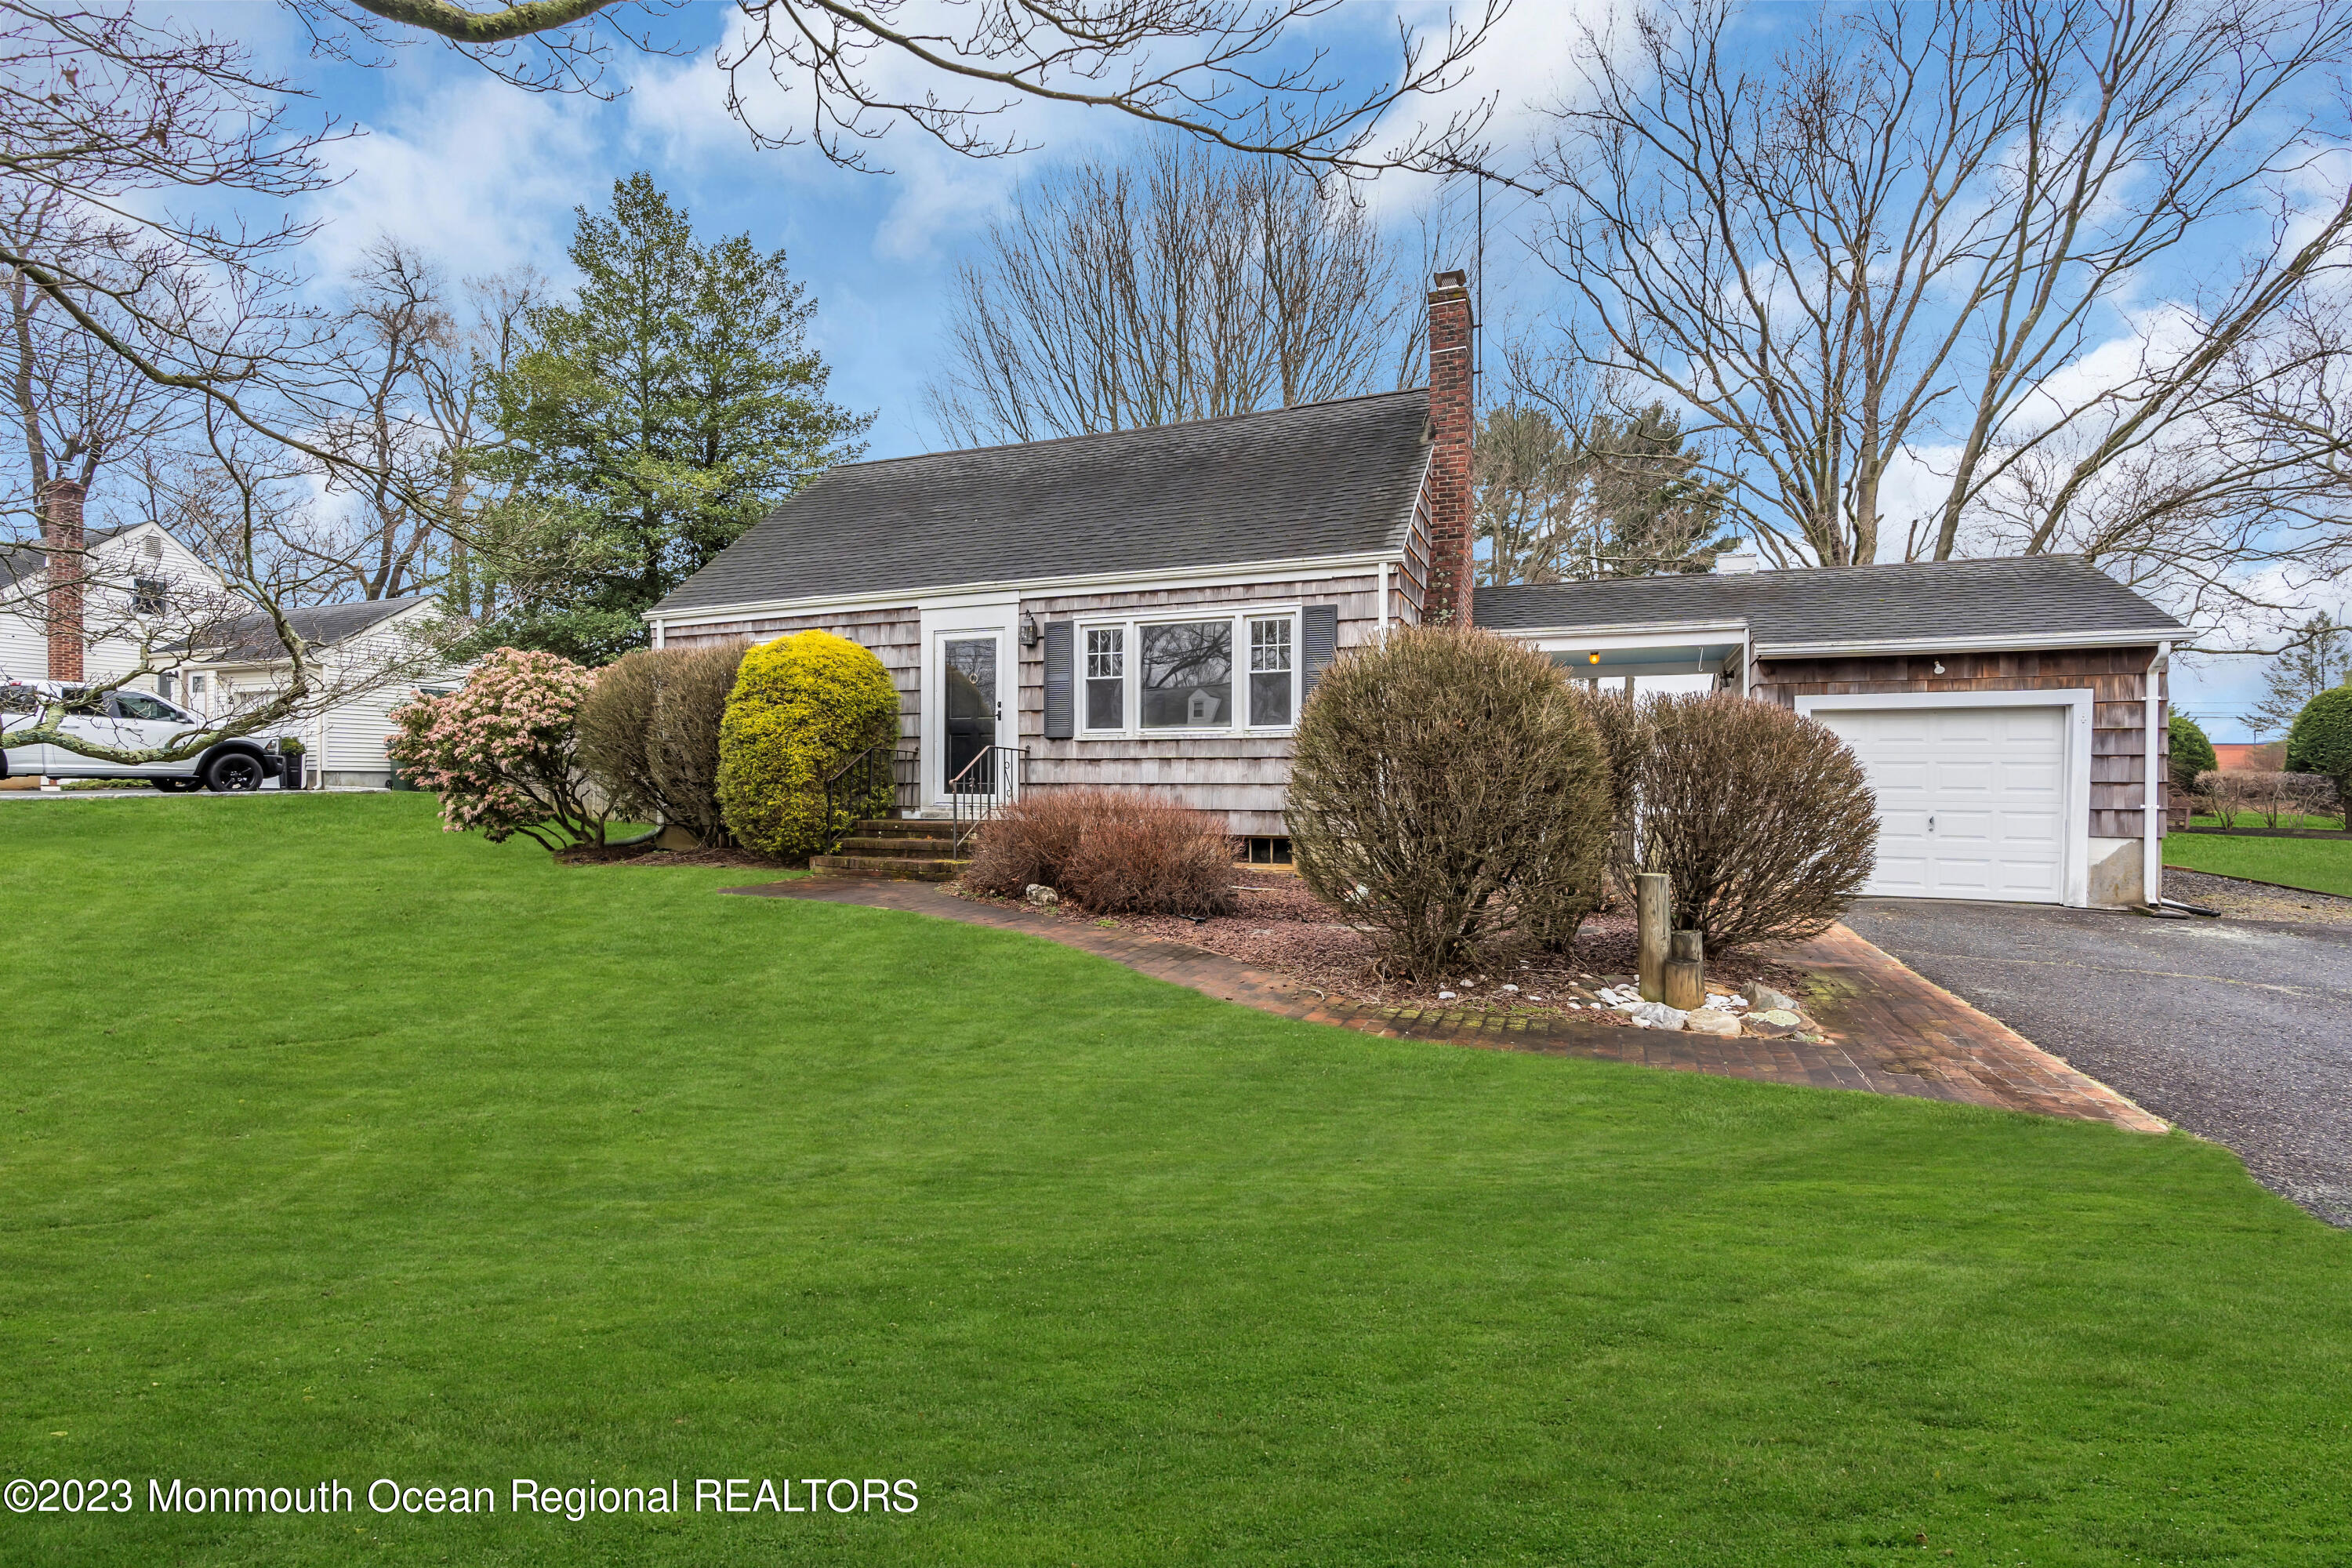 Freehold, NJ Real Estate Housing Market & Trends | Better Homes and Gardens<sup>®</sup> Real Estate